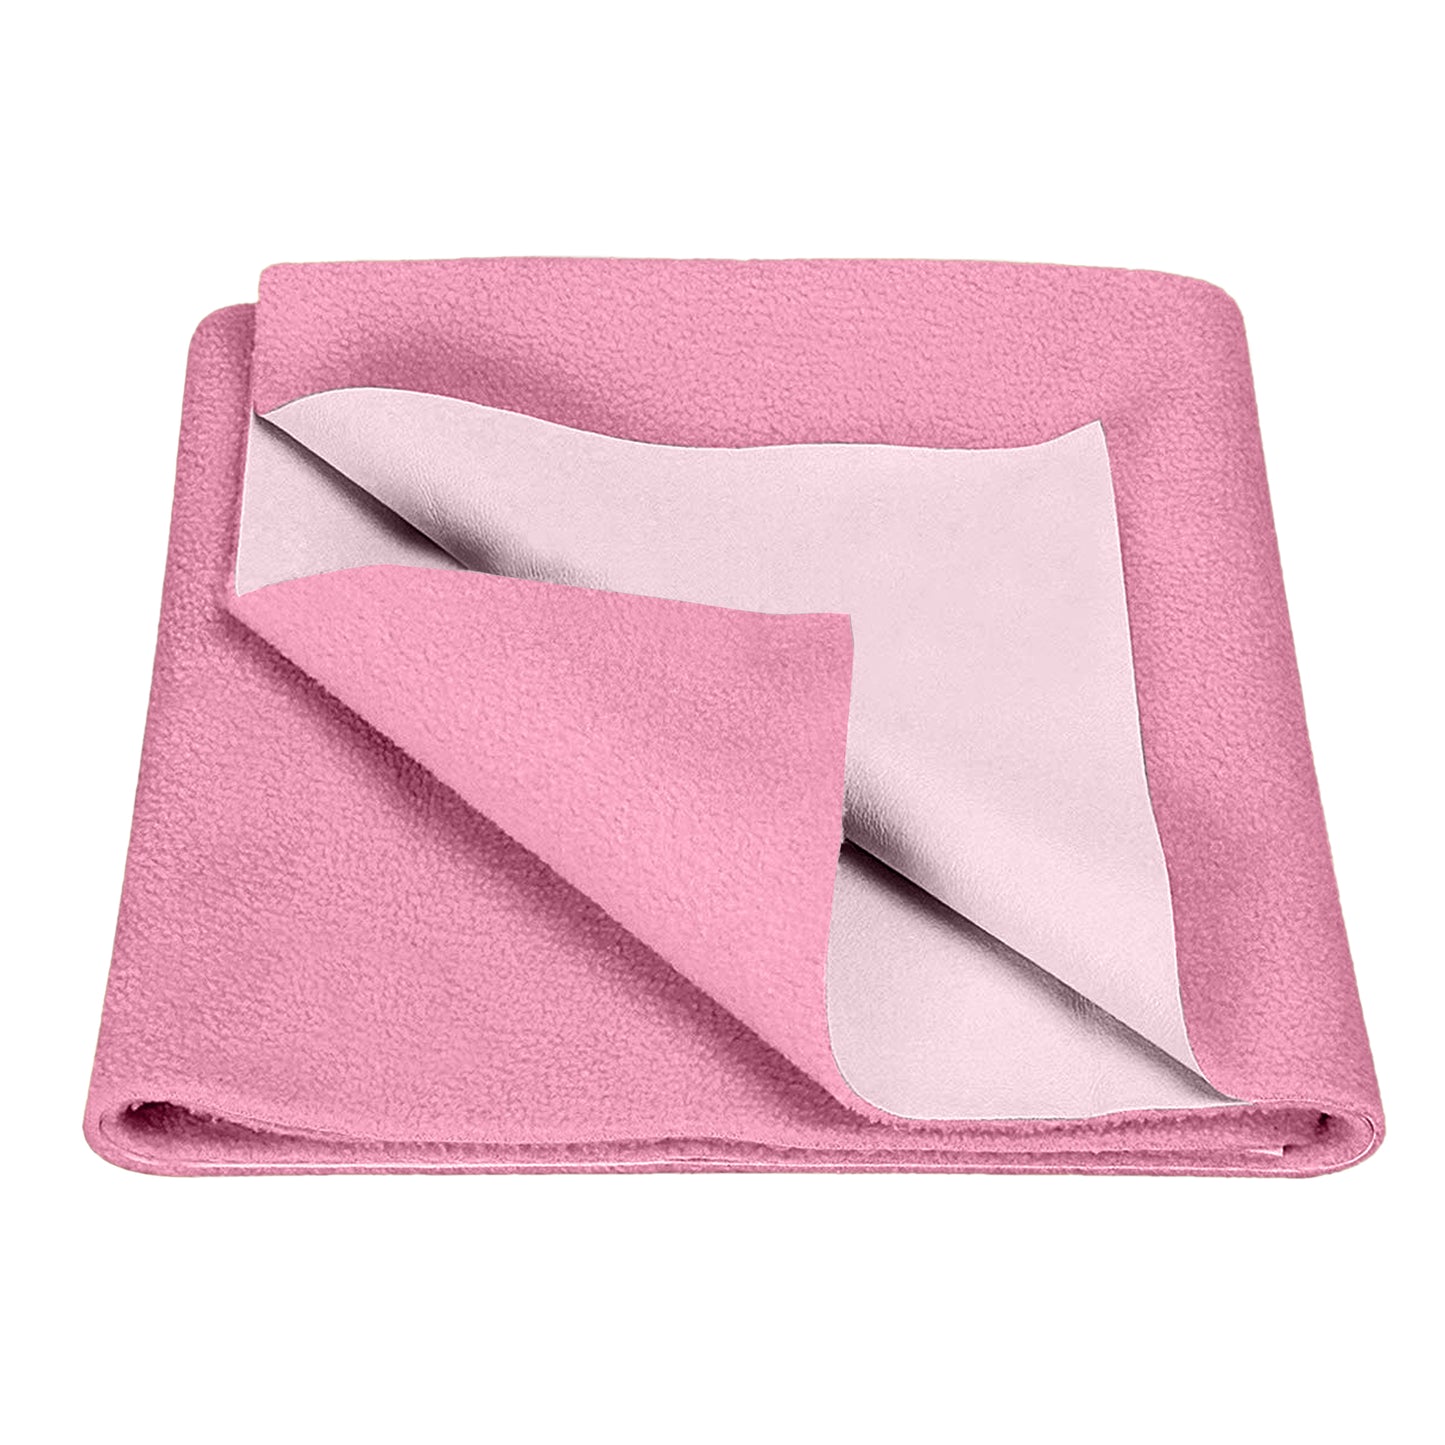 Waterproof Bed Protector, Extra Absorbent Quick Dry Sheet, Baby Bed Protector, Small Size(70 X 50 CM), Pack of 2 -PINK